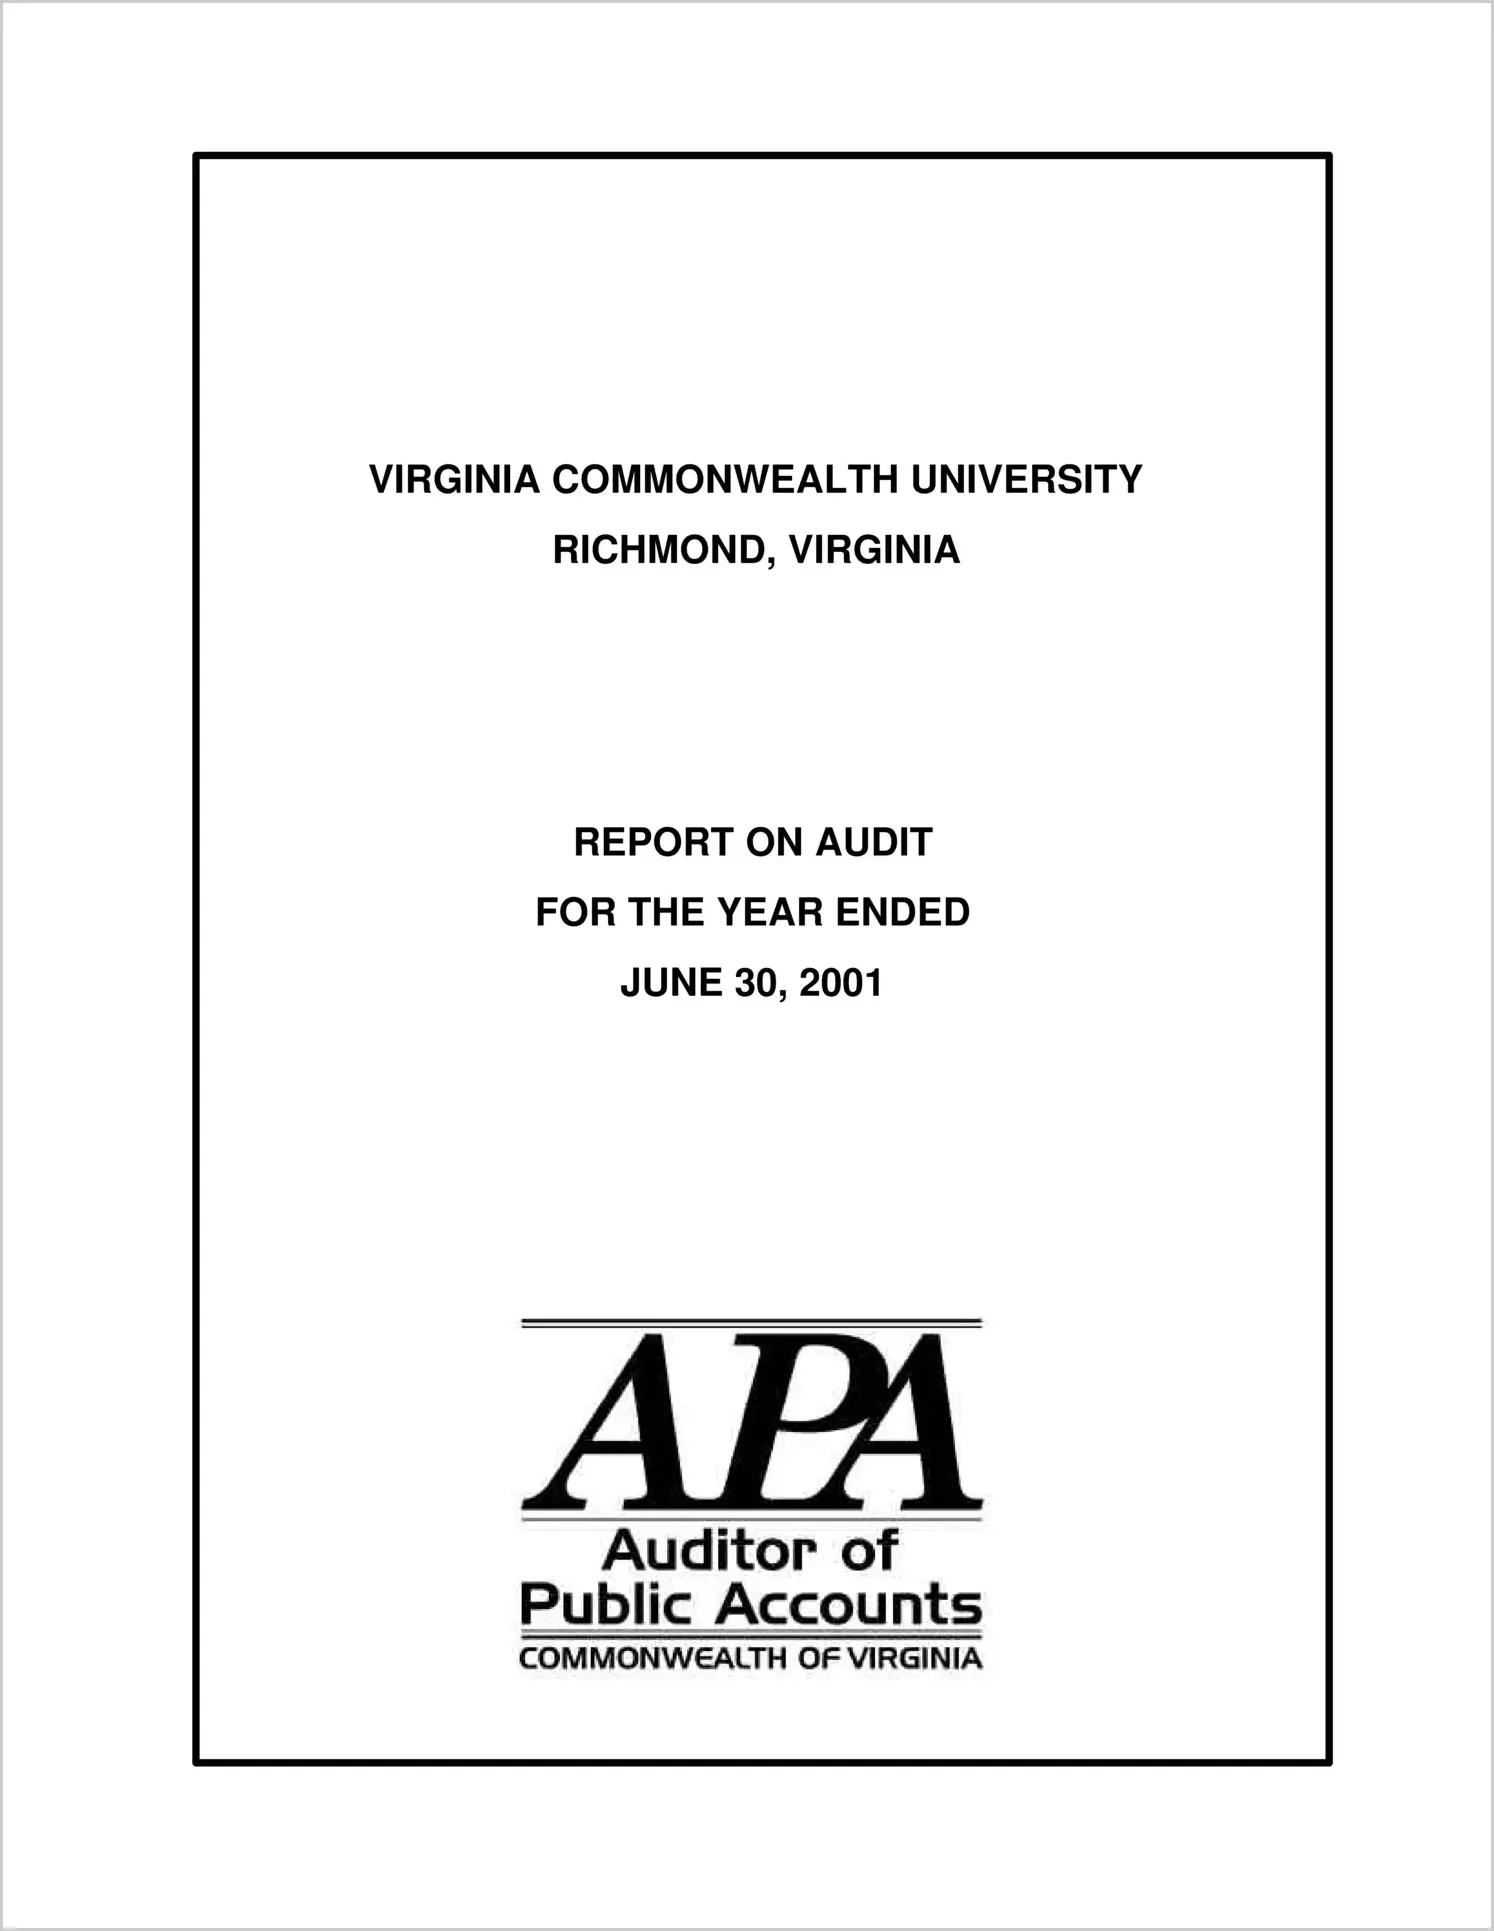 Virginia Commonwealth University for the year ended June 30, 2001